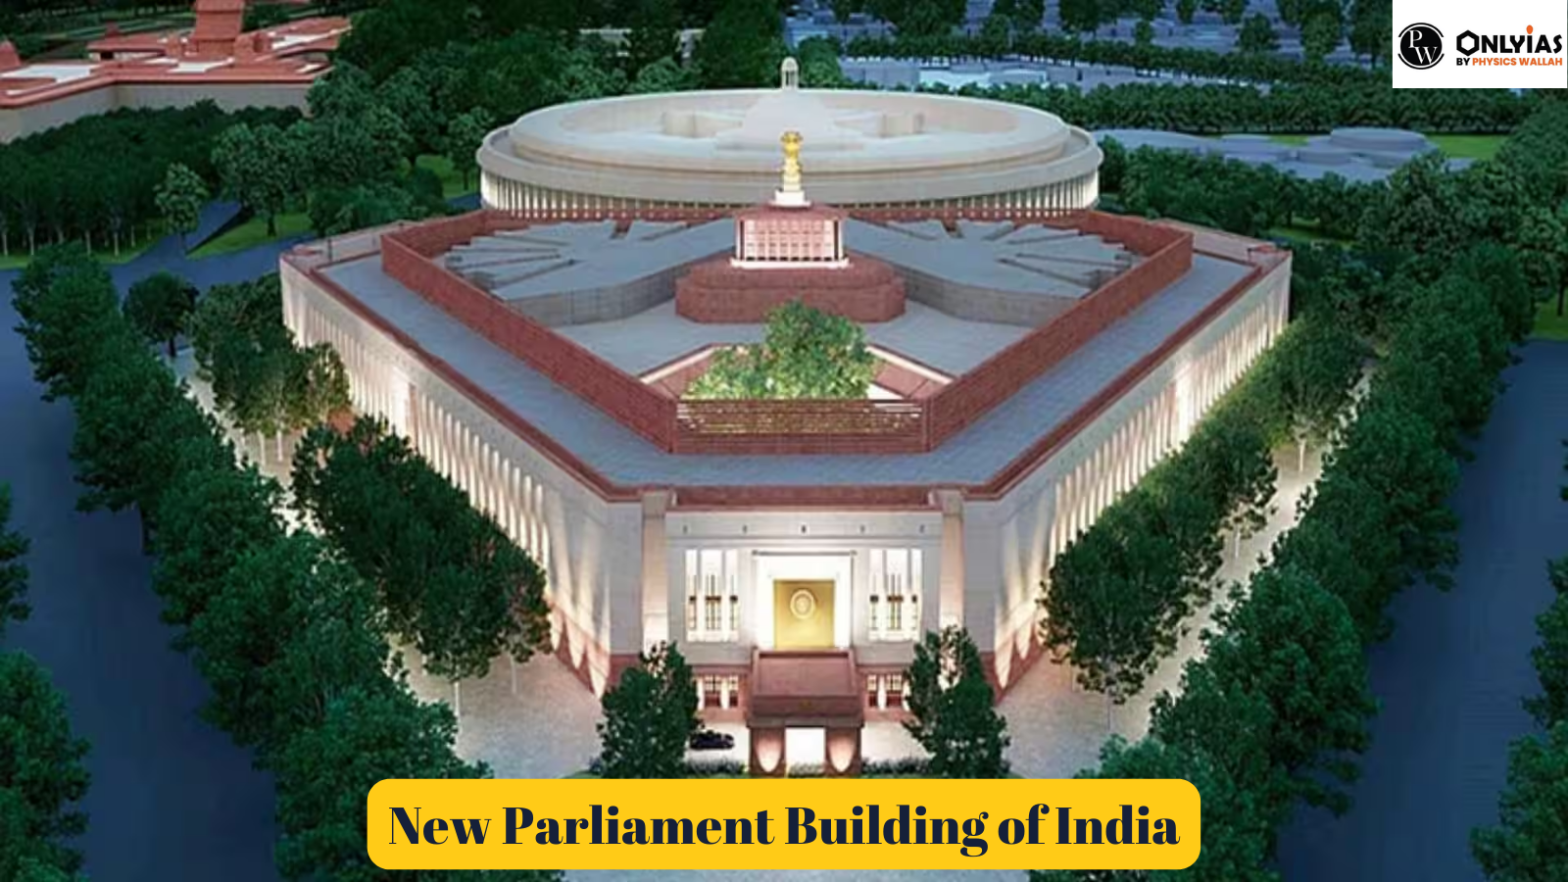 New Parliament Building: MPs to Begin Work in New Parliament Building on Ganesh Chaturthi